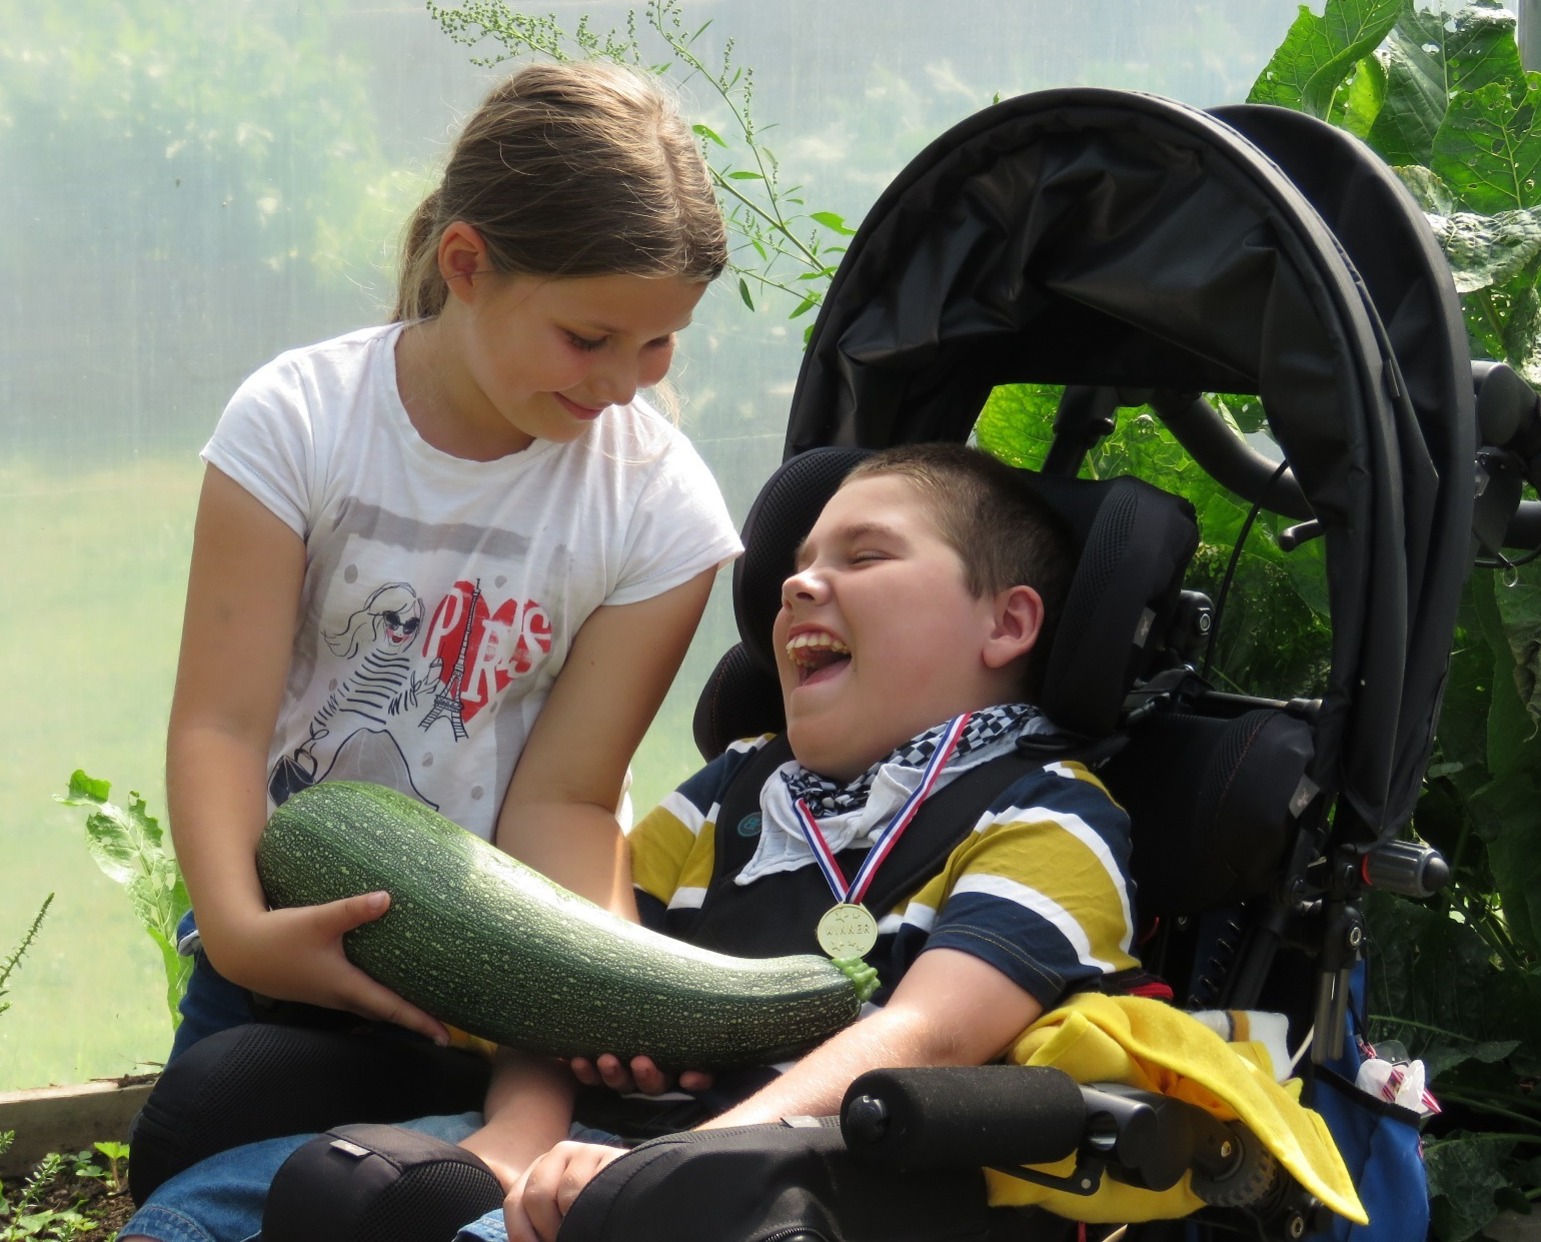 Scarlett Merry a young carer with her brother George who has quadriplegic cerebral palsy on holiday at Kerry's Farm Wales